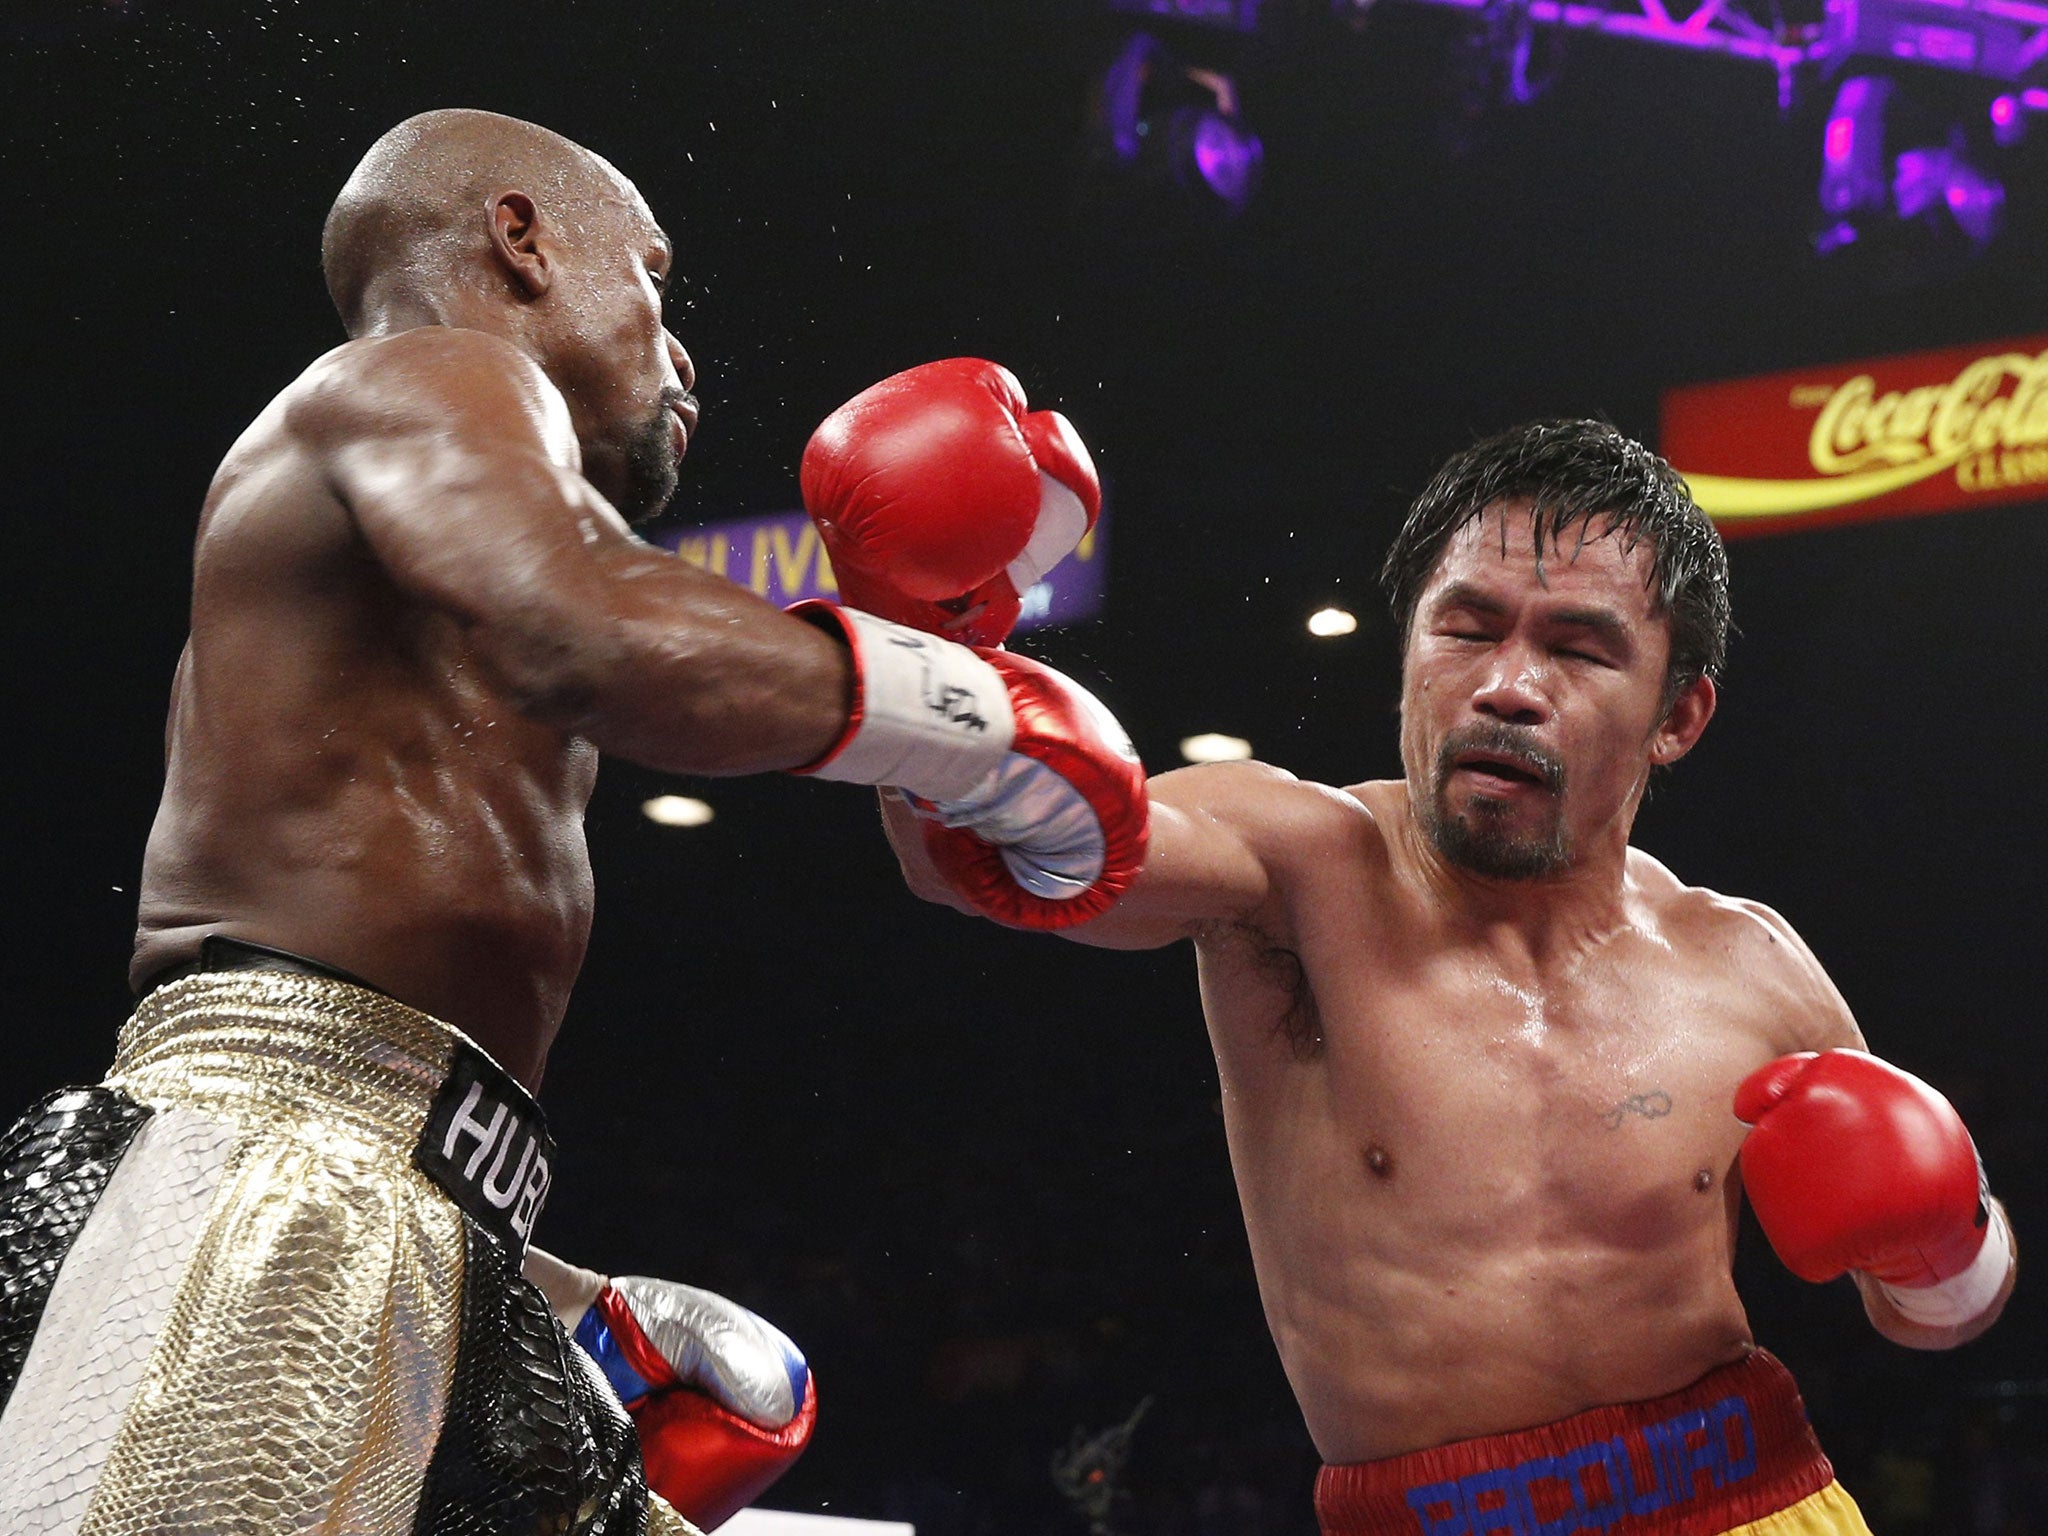 Mayweather won by unanimous decision as Pacquiao struggled throughout